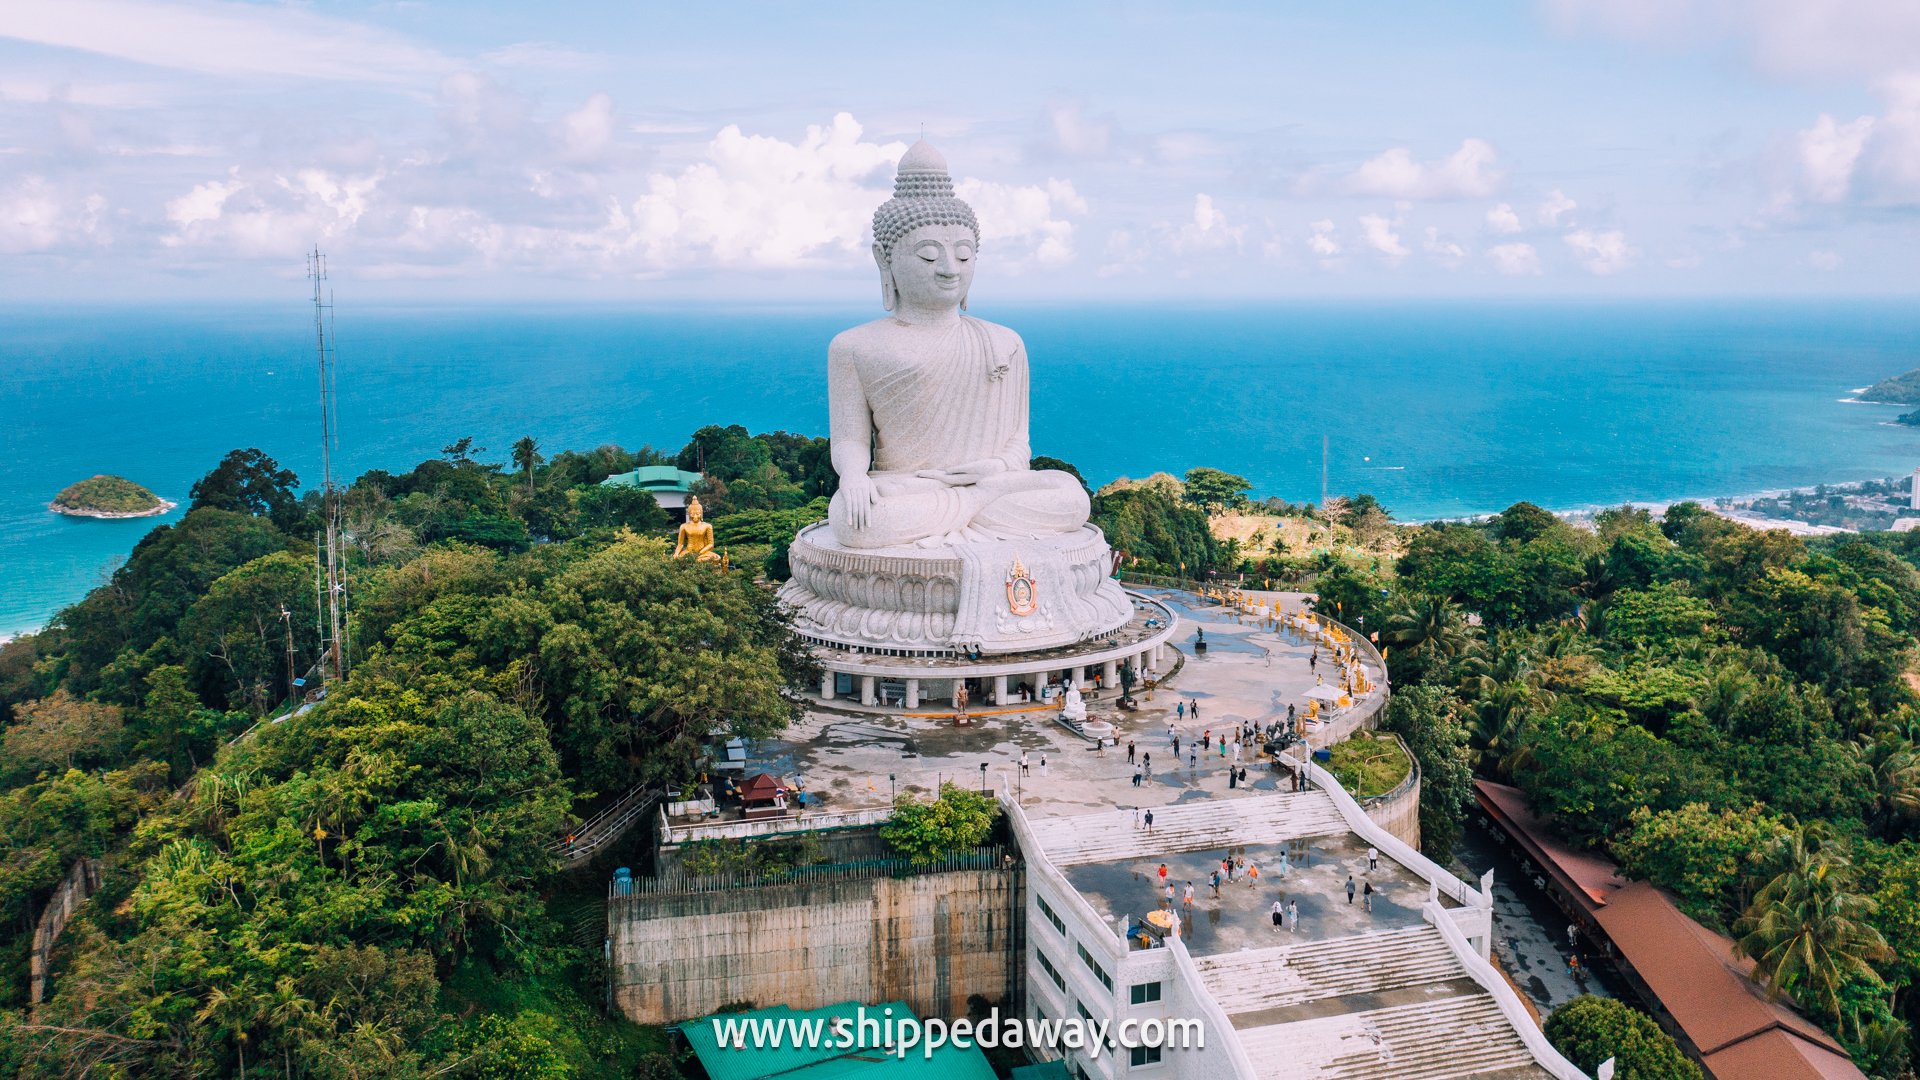 Drone aerial view of the Big Buddha in Phuket, Thailand